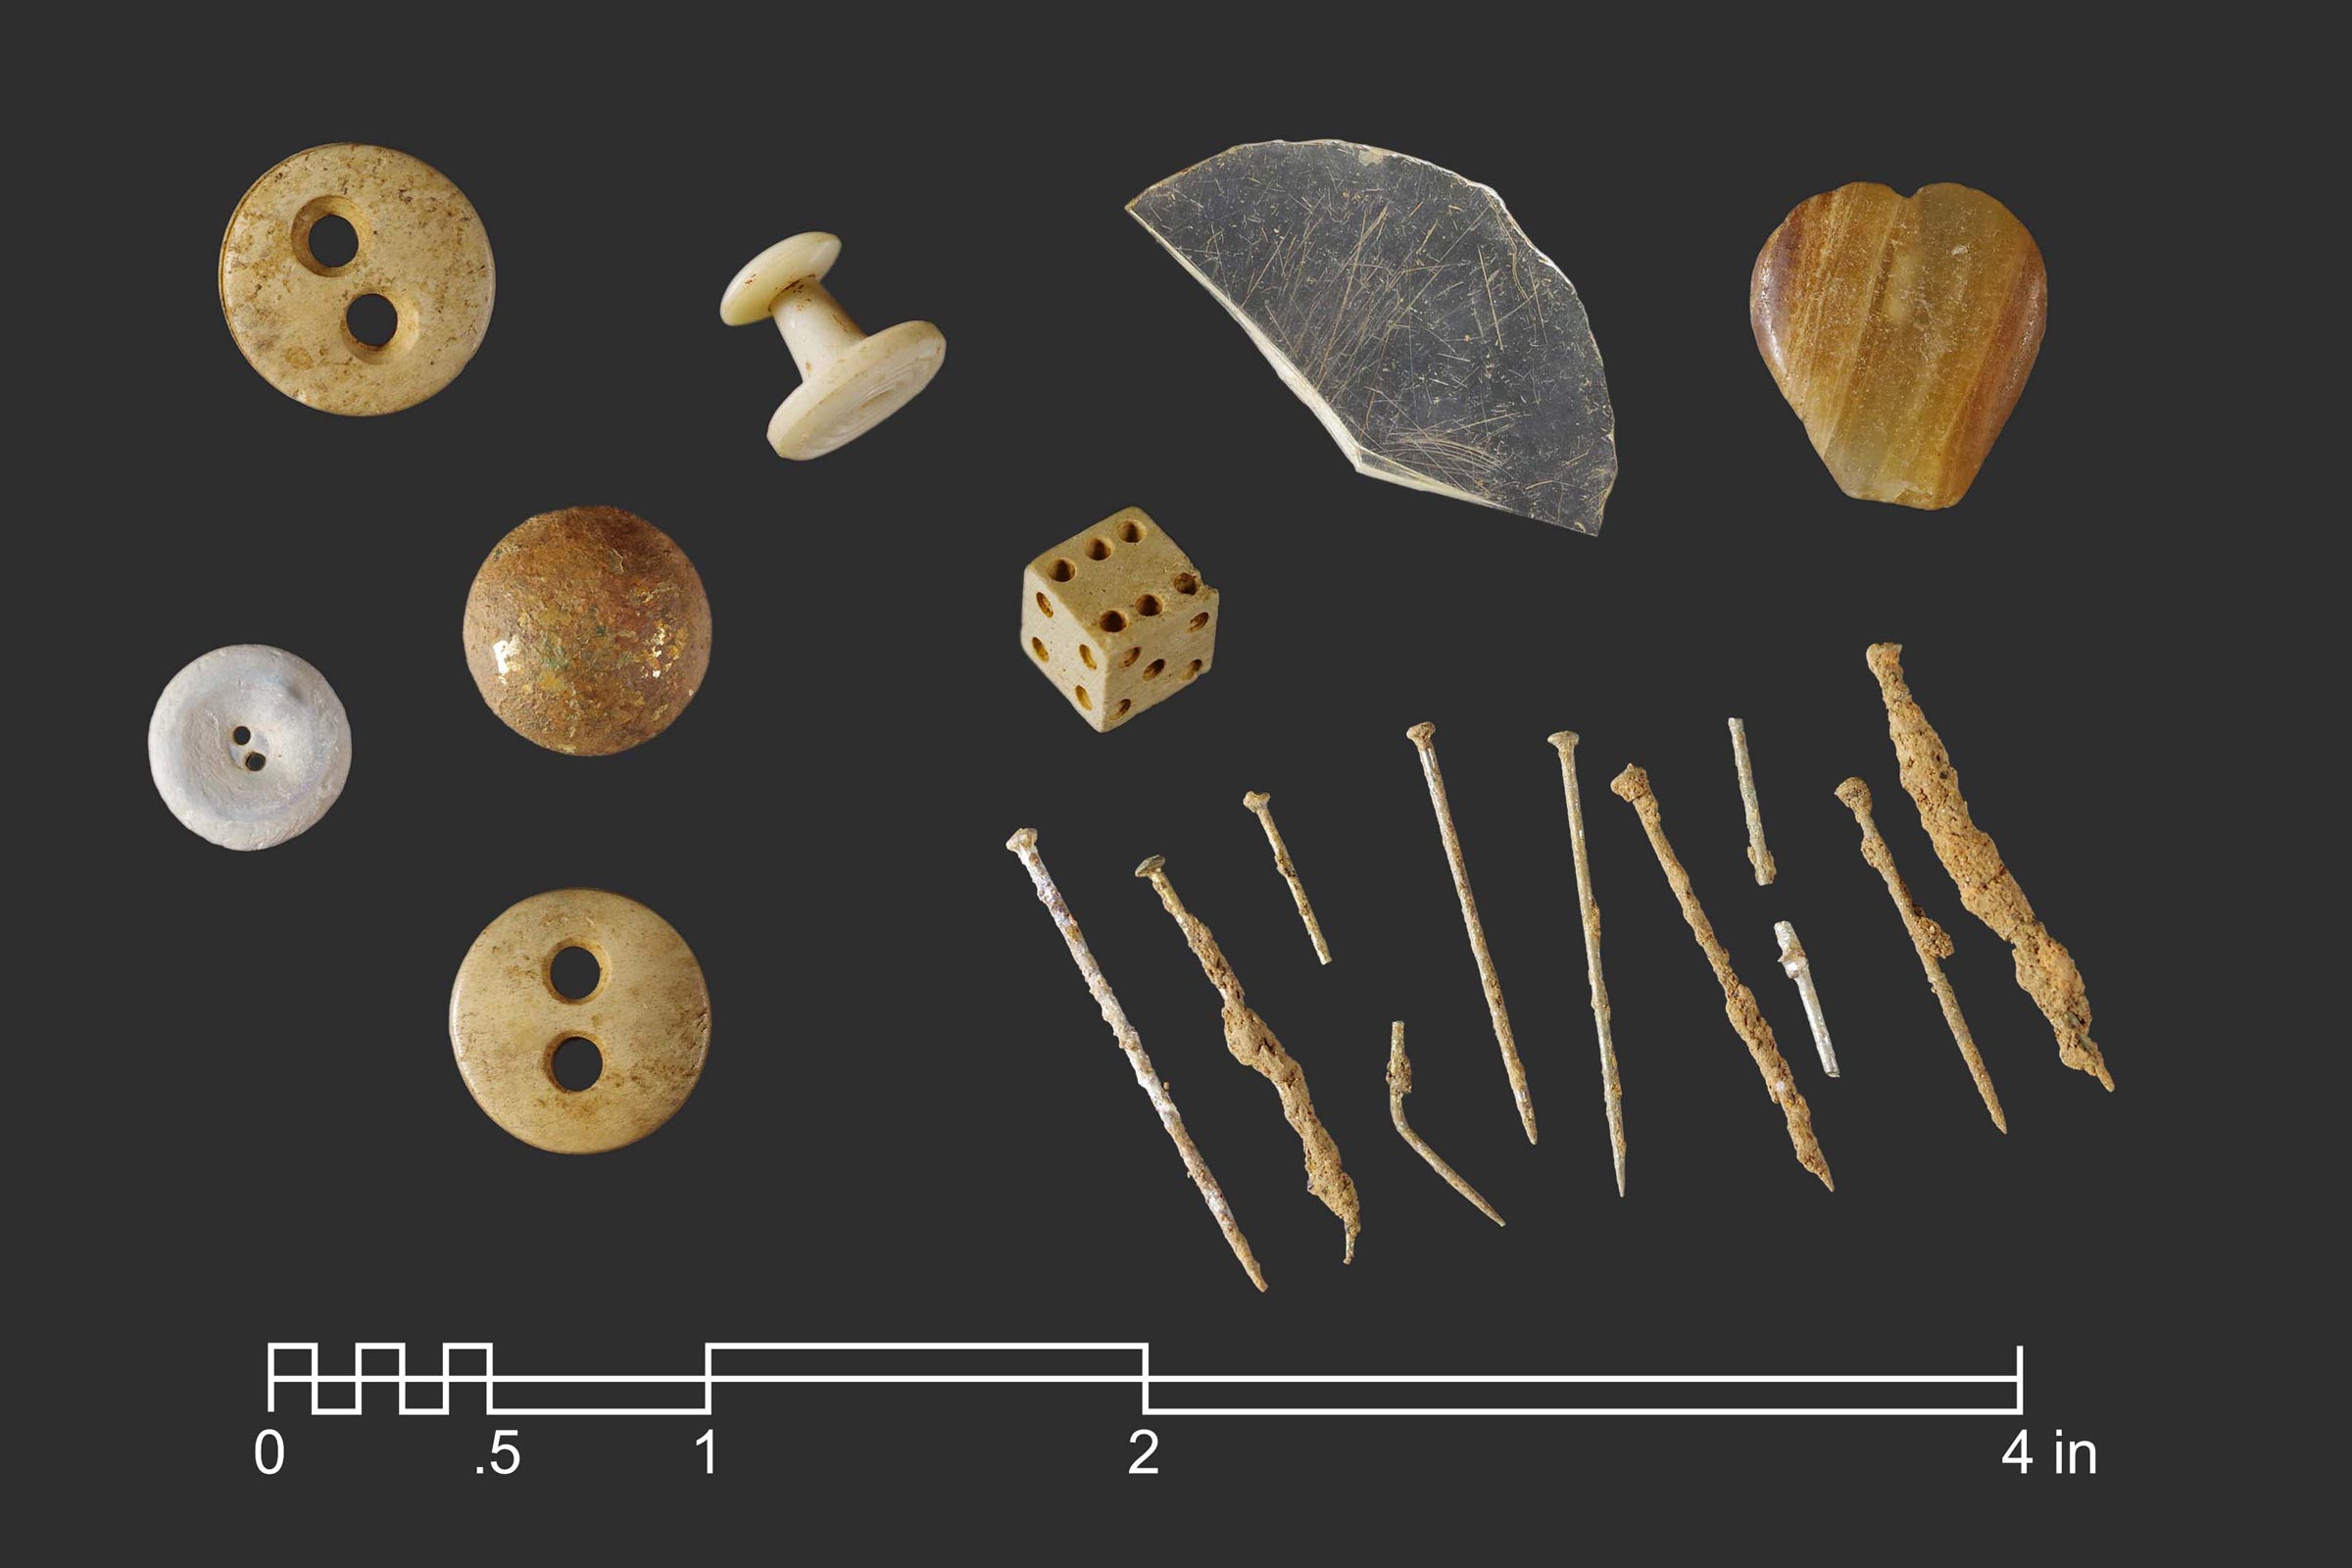 An array of small artifacts including a die, buttons, nails and various other items